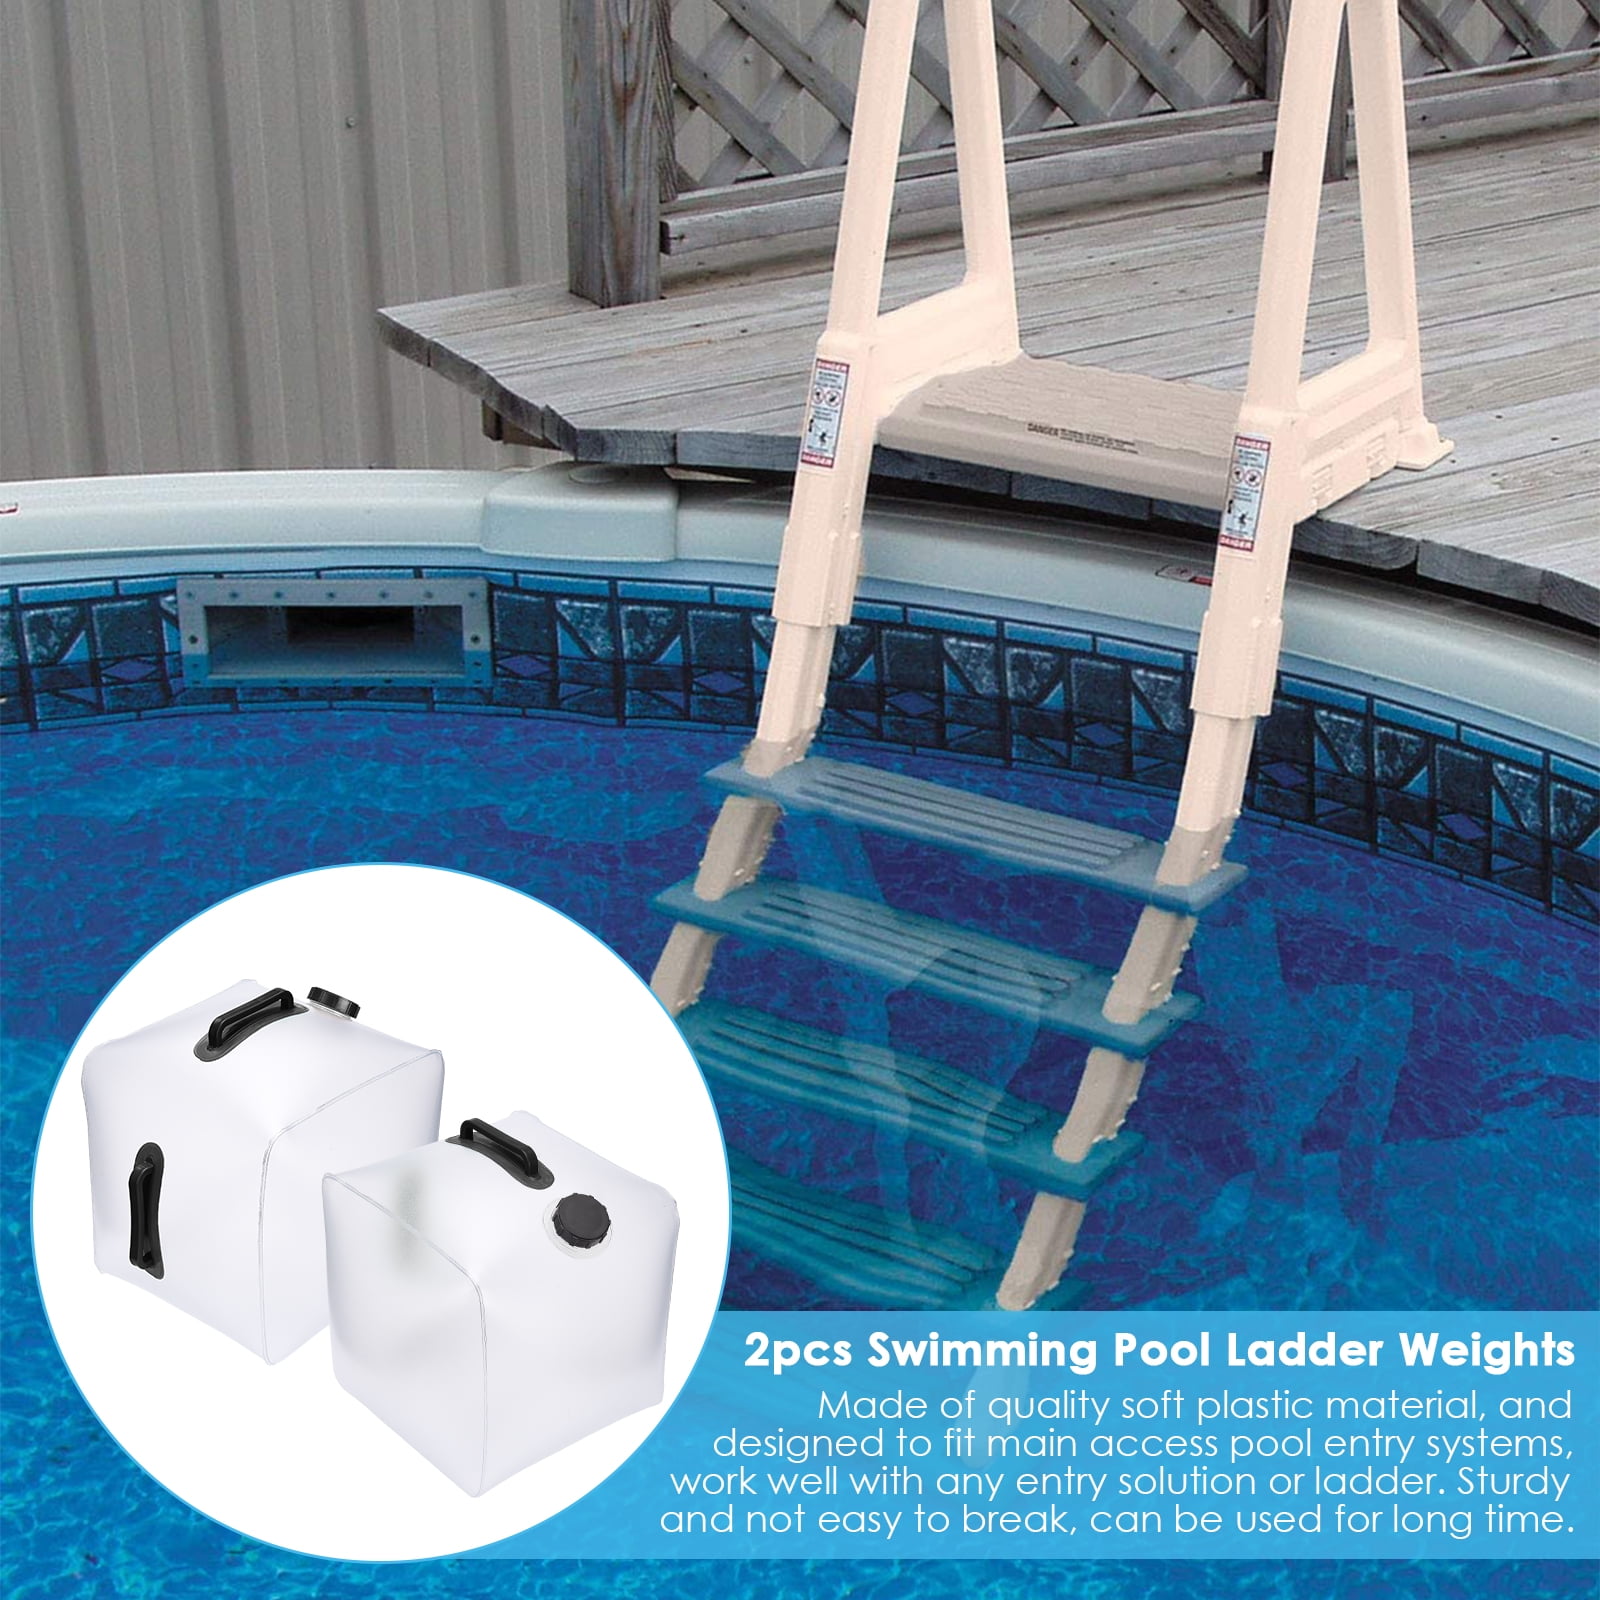 2pcs Swimming Pool Ladder Weights,Universal Plastic Pool Step SandBag,Fillable Anchor Bag for Above Ground Pool Entry System 